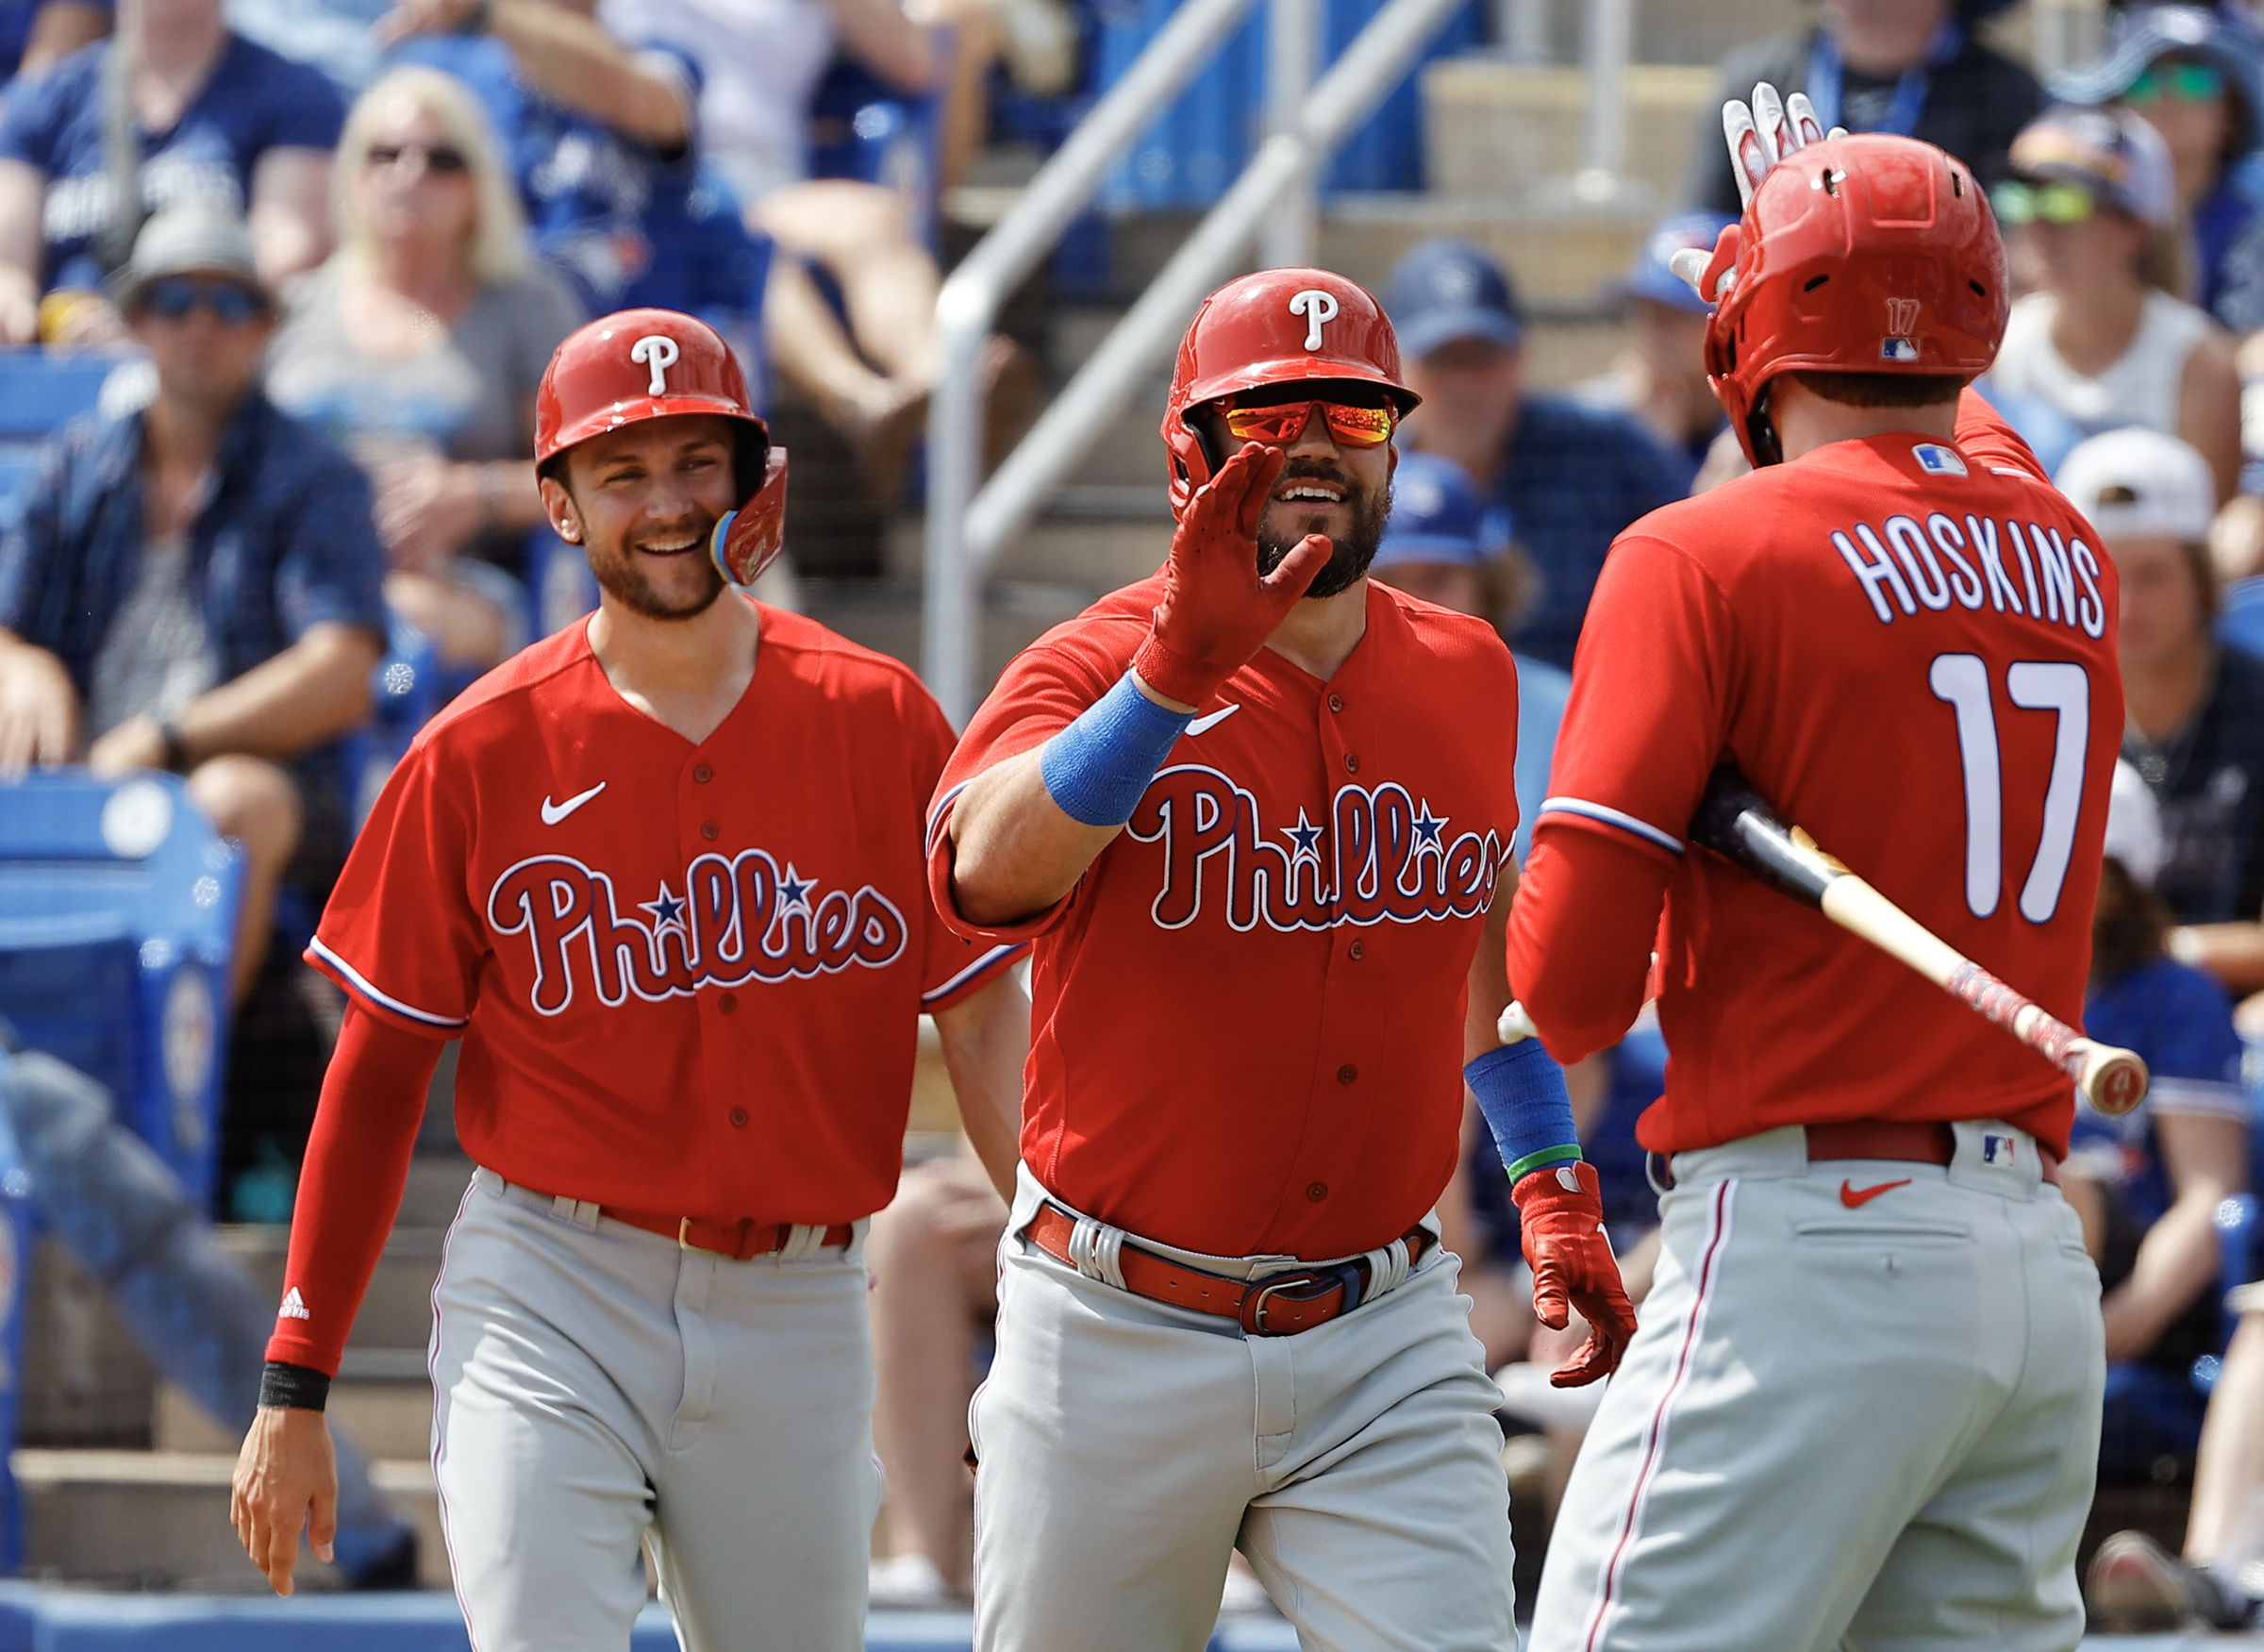 Season preview: Top 10 things to know about the 2023 Phillies